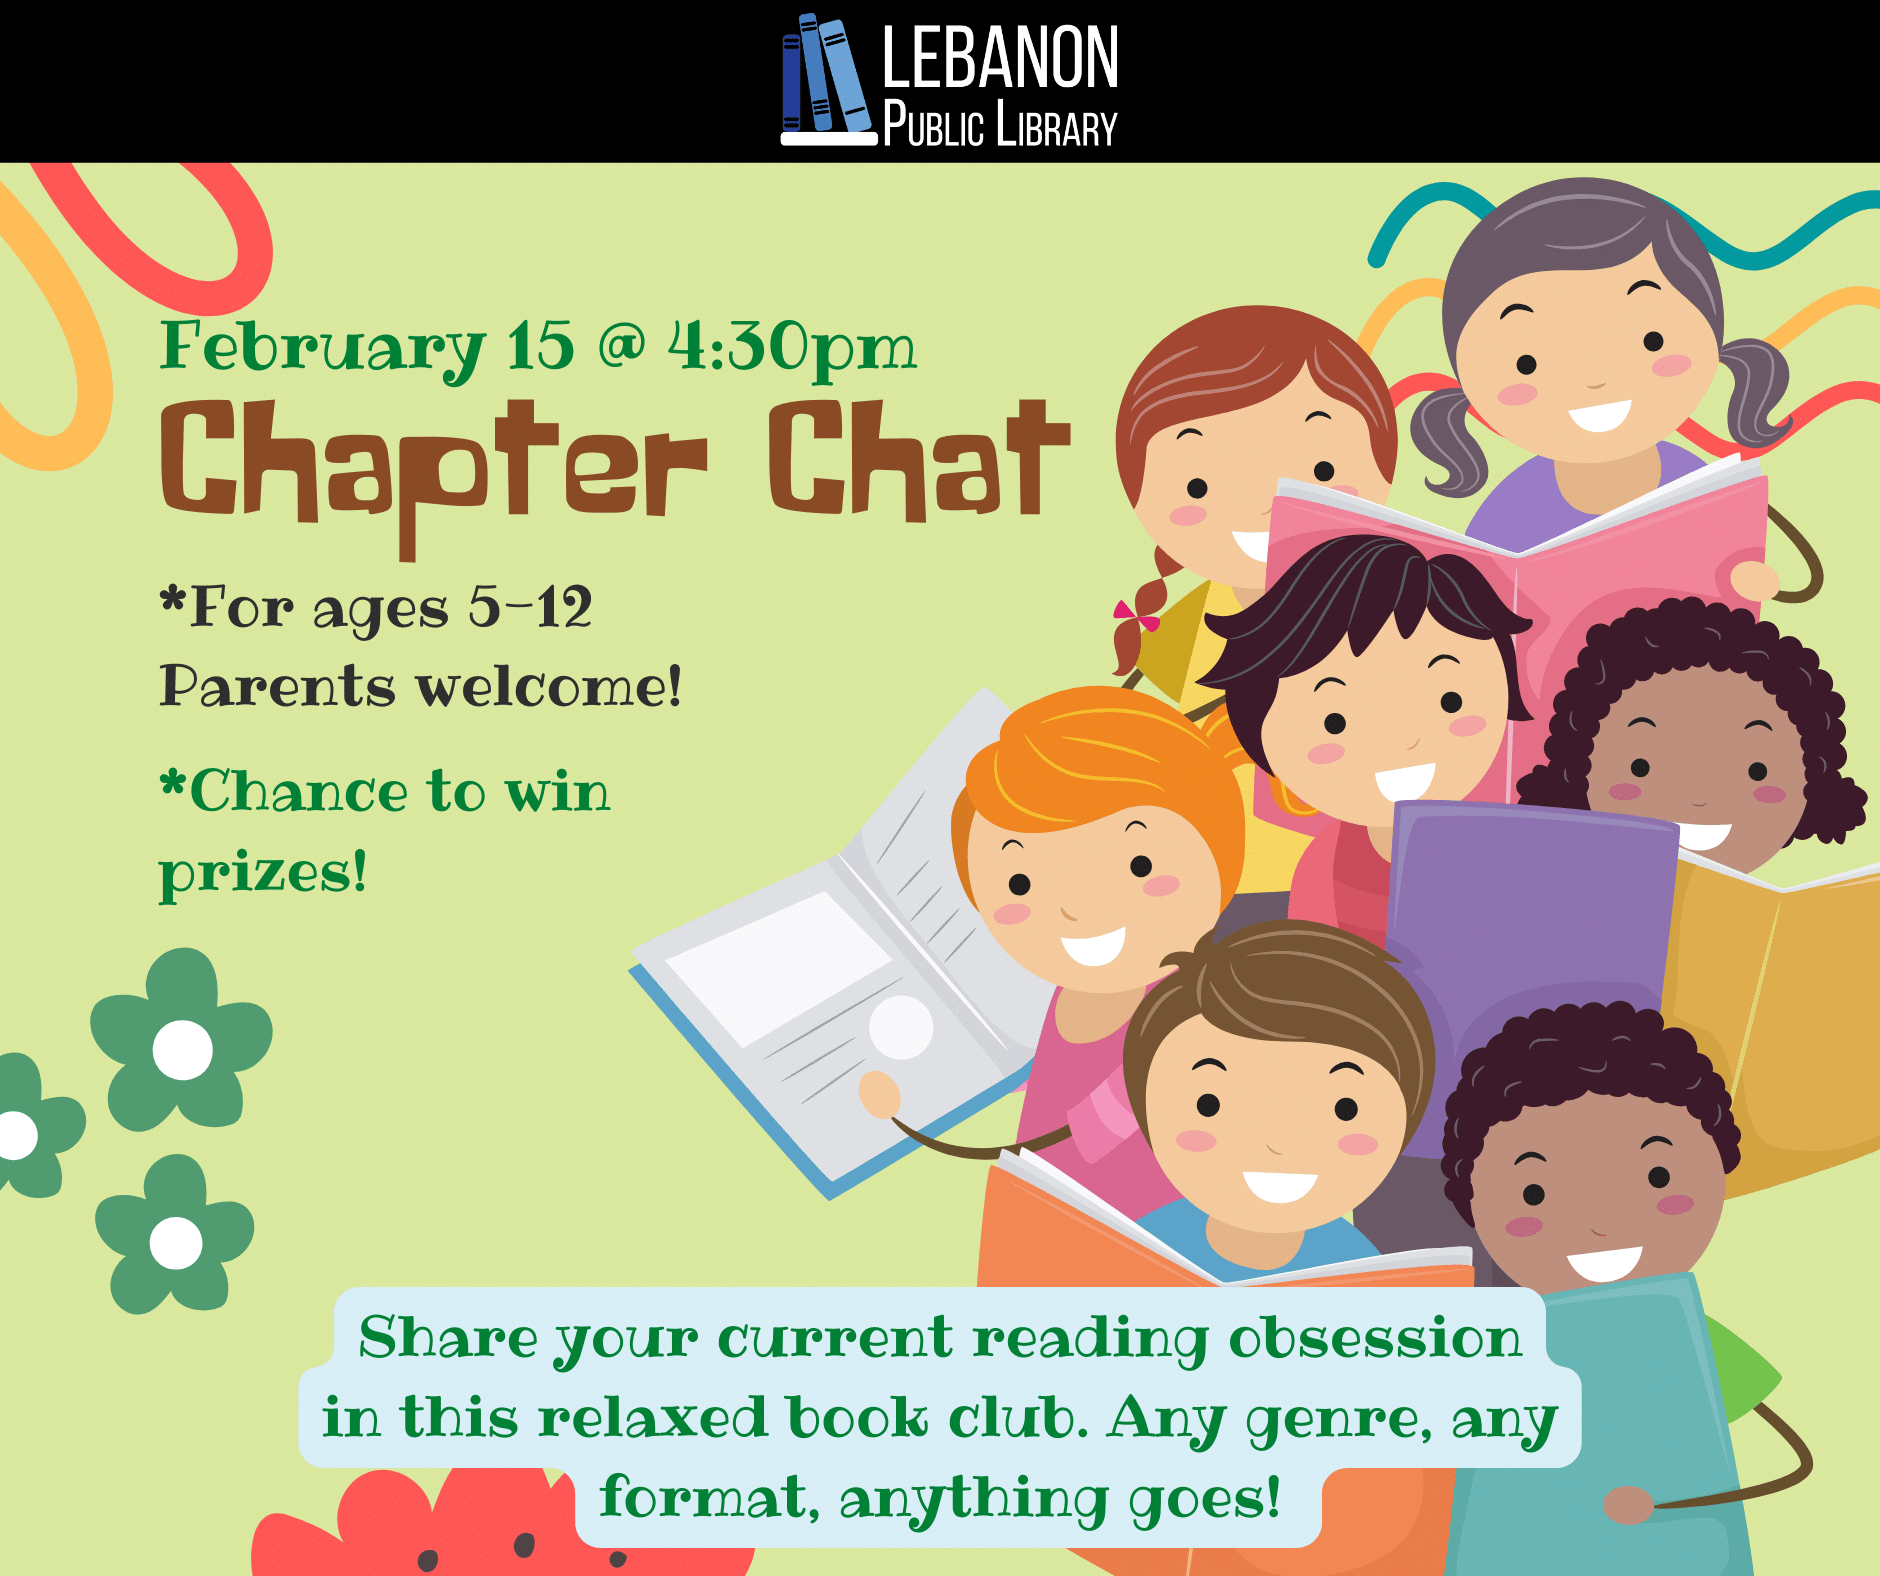 Chapter Chat, February 15th at 4:30pm, for ages 5 to 12